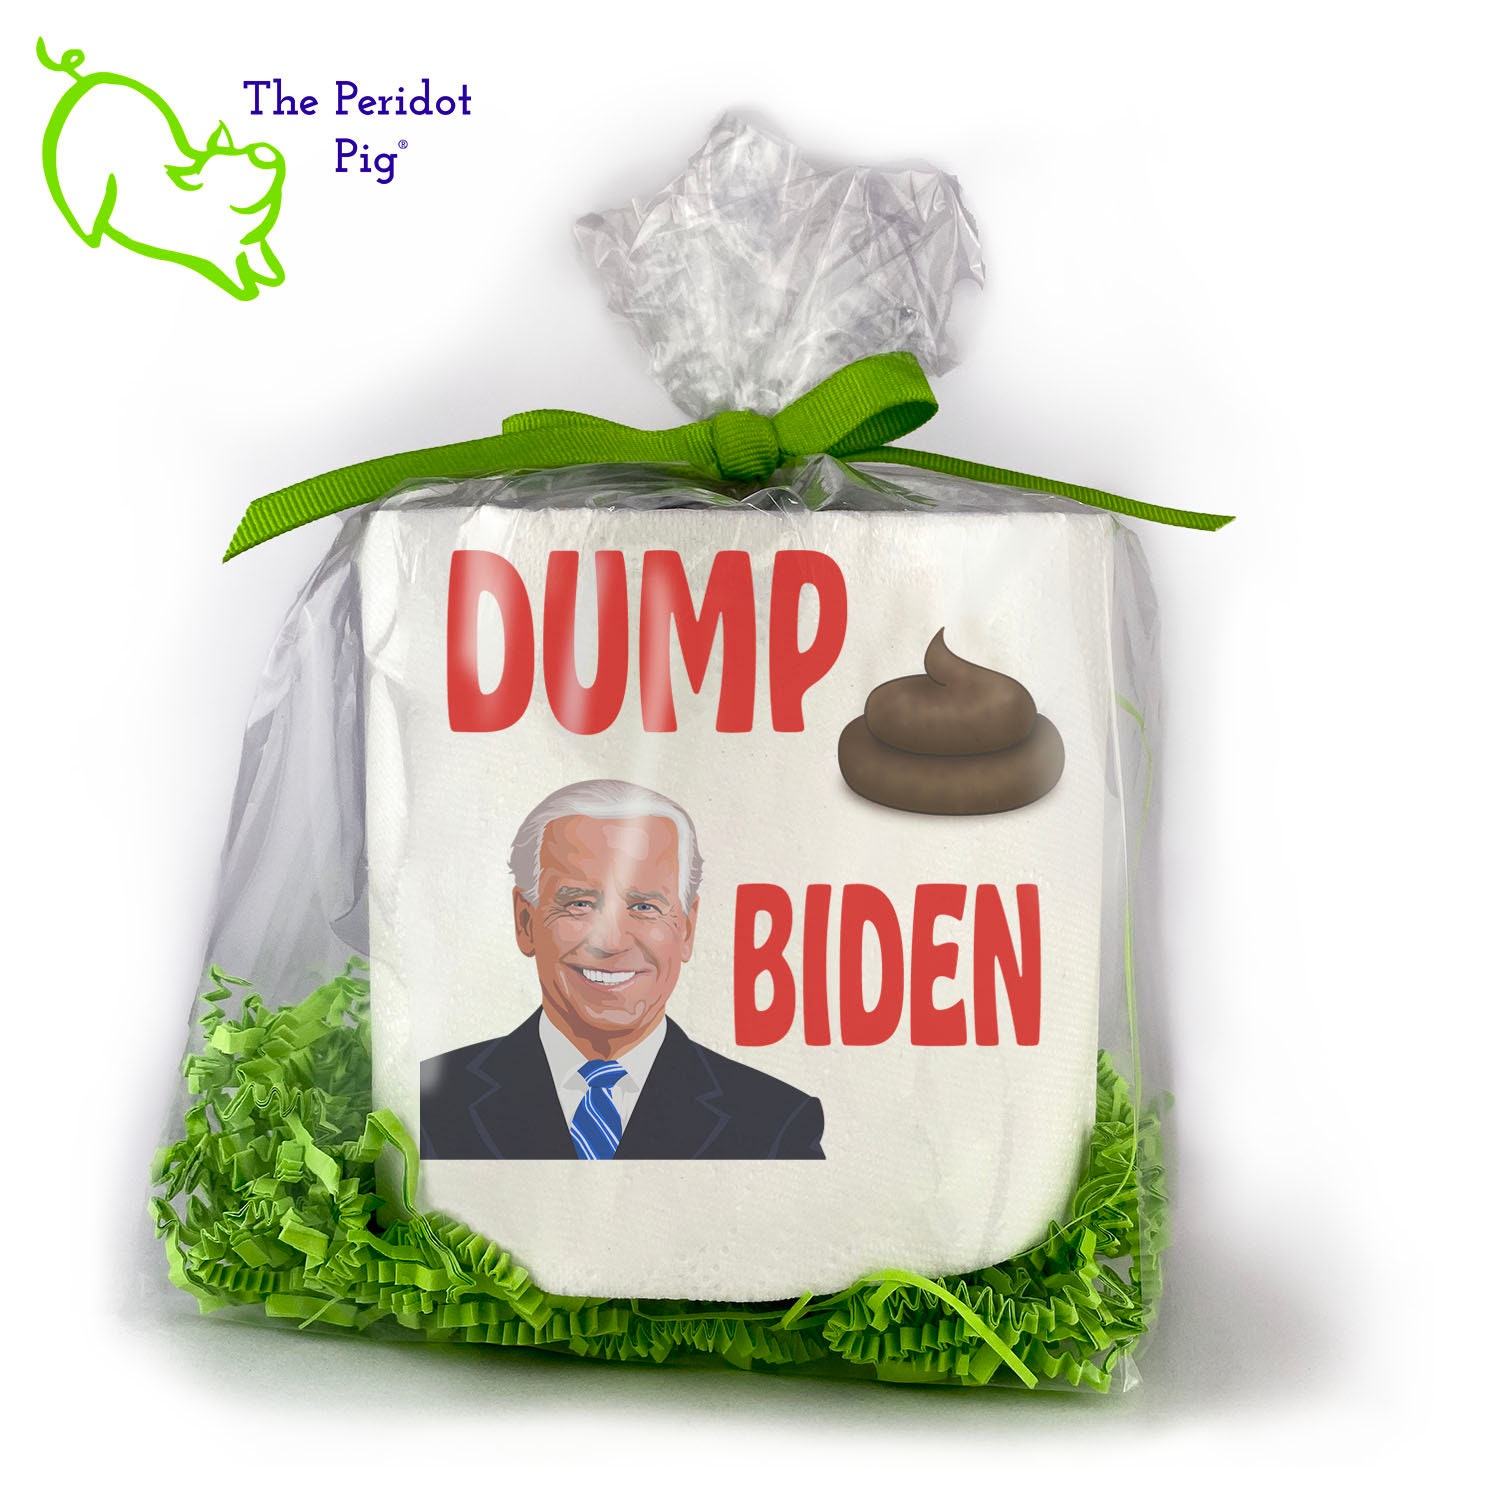 Biden Toilet Light Projector, Joe Biden Toilet Target Light Projector 2.0  with High Definition Funny Democratic Images, Best Gag Gifts for Adults